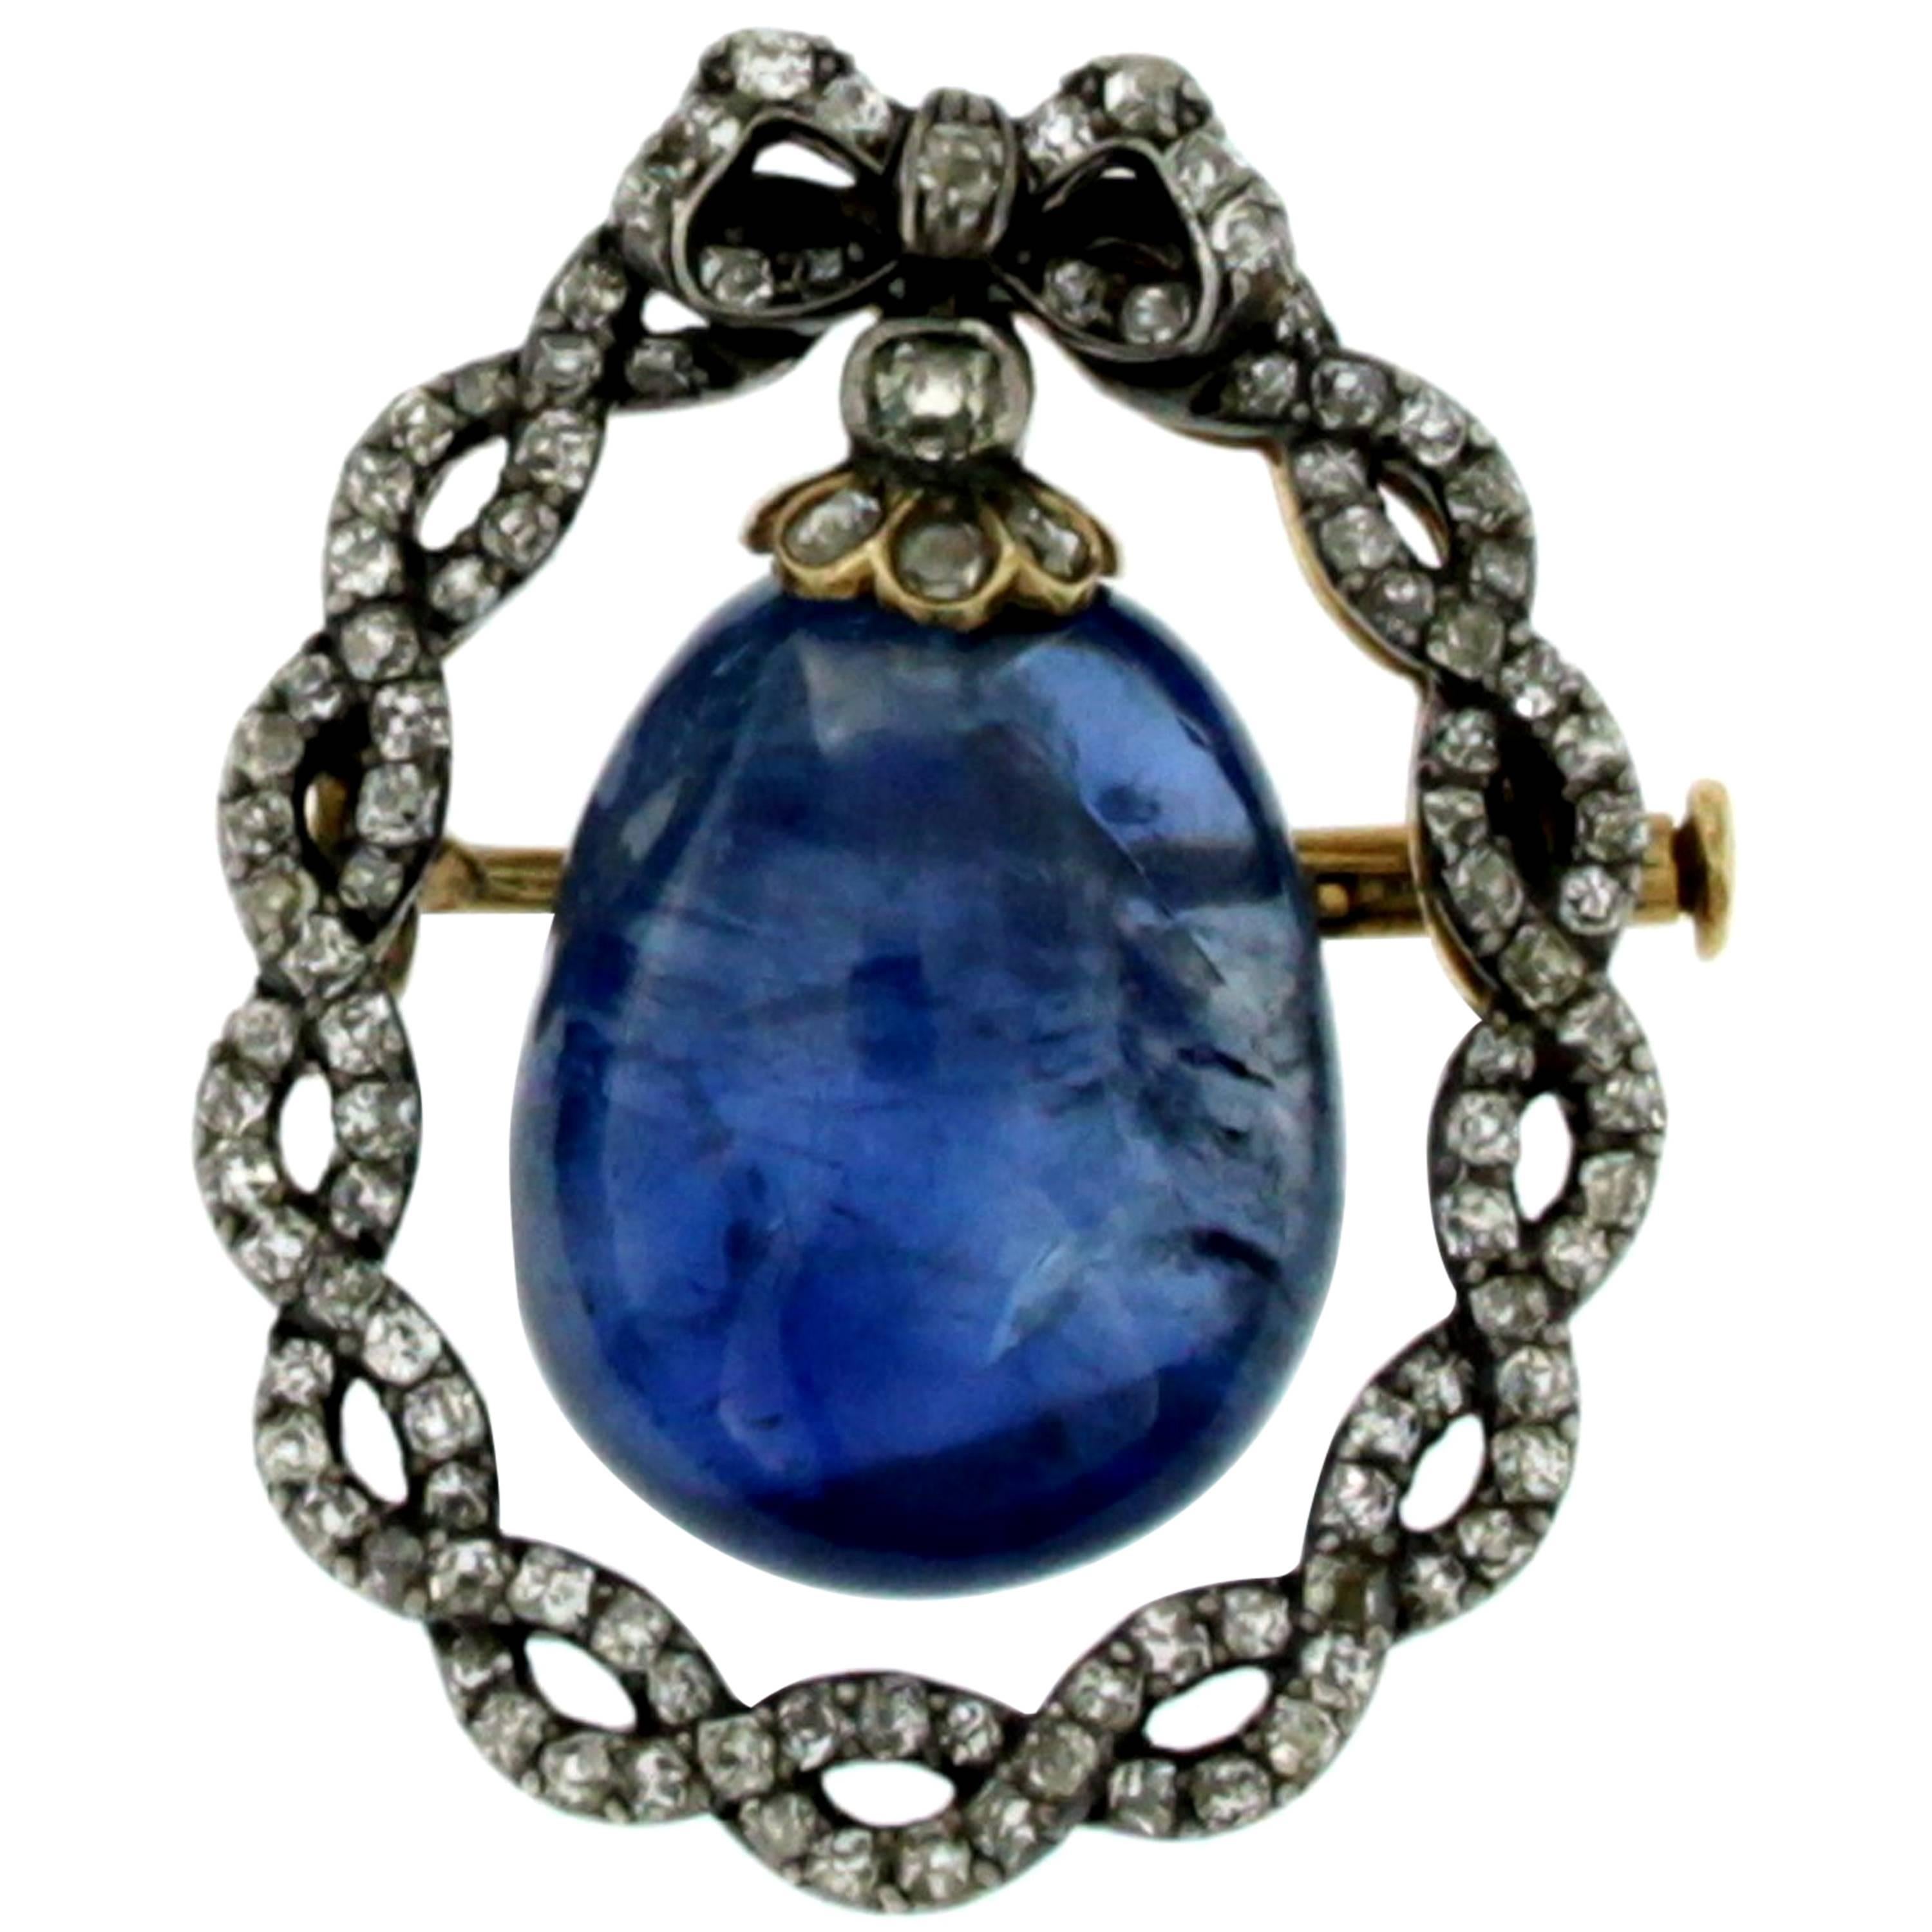 1890s Hallmarked French Natural No Heated Sapphire Diamond Gold Brooch-Pendant